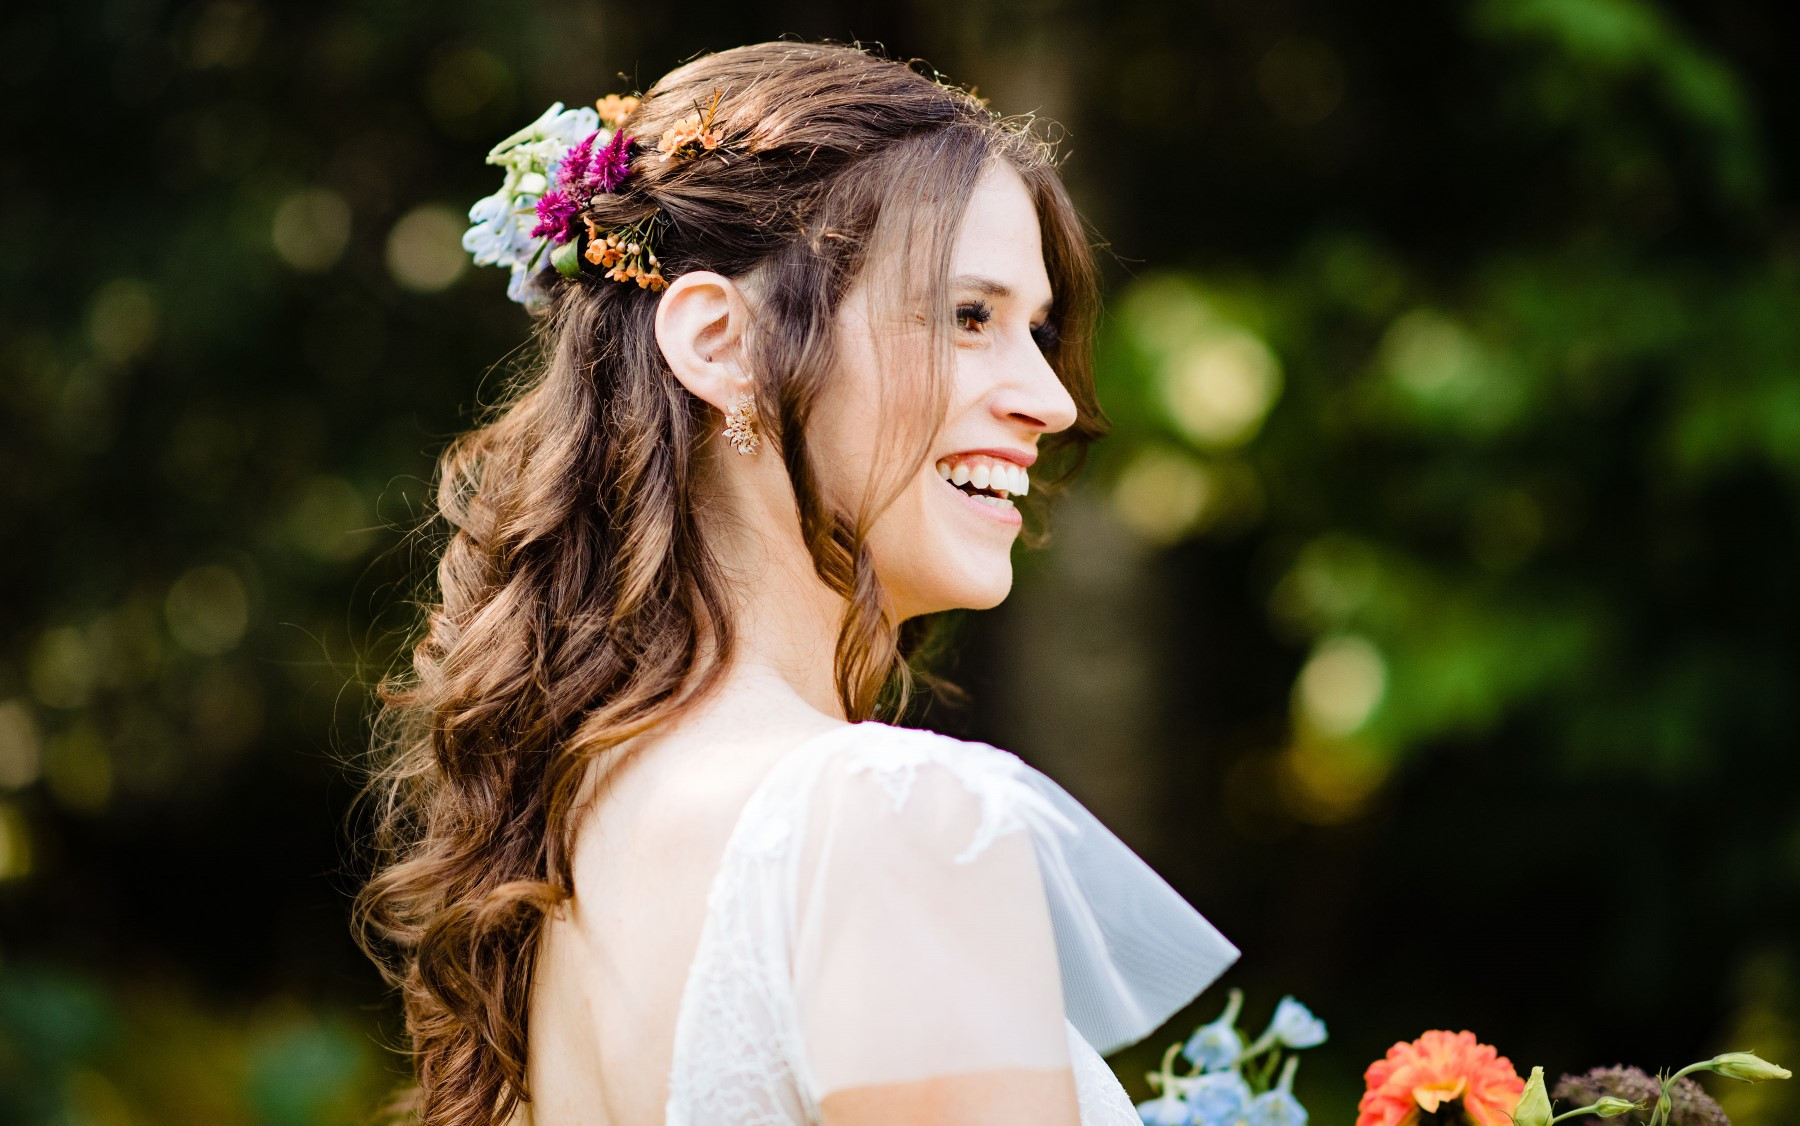 floral pieces in hair for wedding day with bride smiling